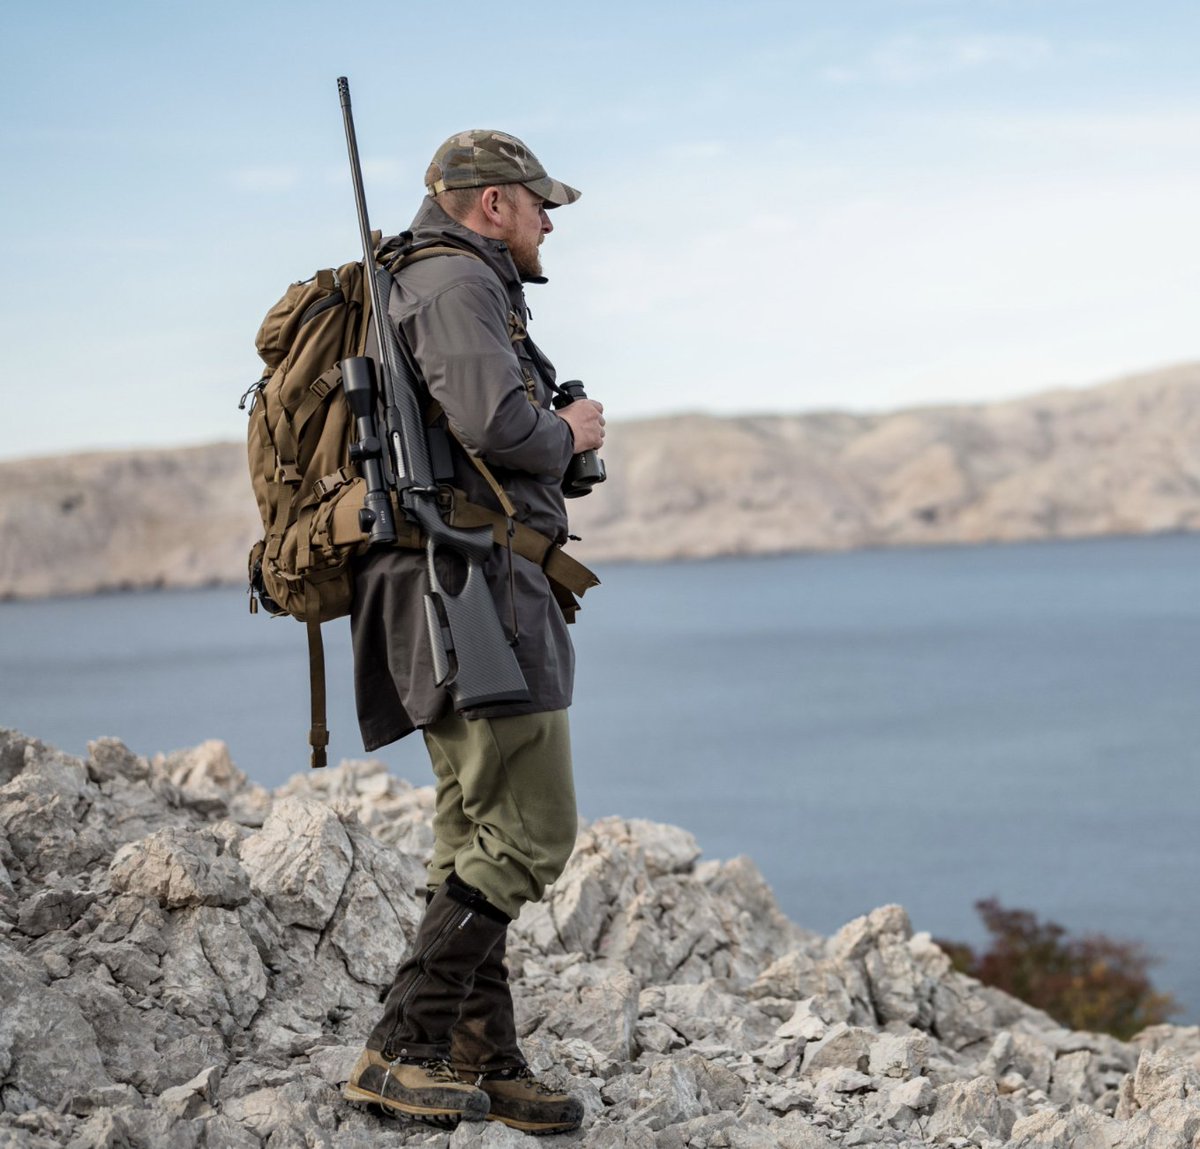 #newzealand RT @Sauer_USA: We all have a bucket list of hunting trips. What's yours?

#dreamhunt #huntingbucketlist #hunters #sauerrifles #sauerusa #sauer404synchroxtc #sauer404 #sauer404xtc #hunting #huntingwishlist